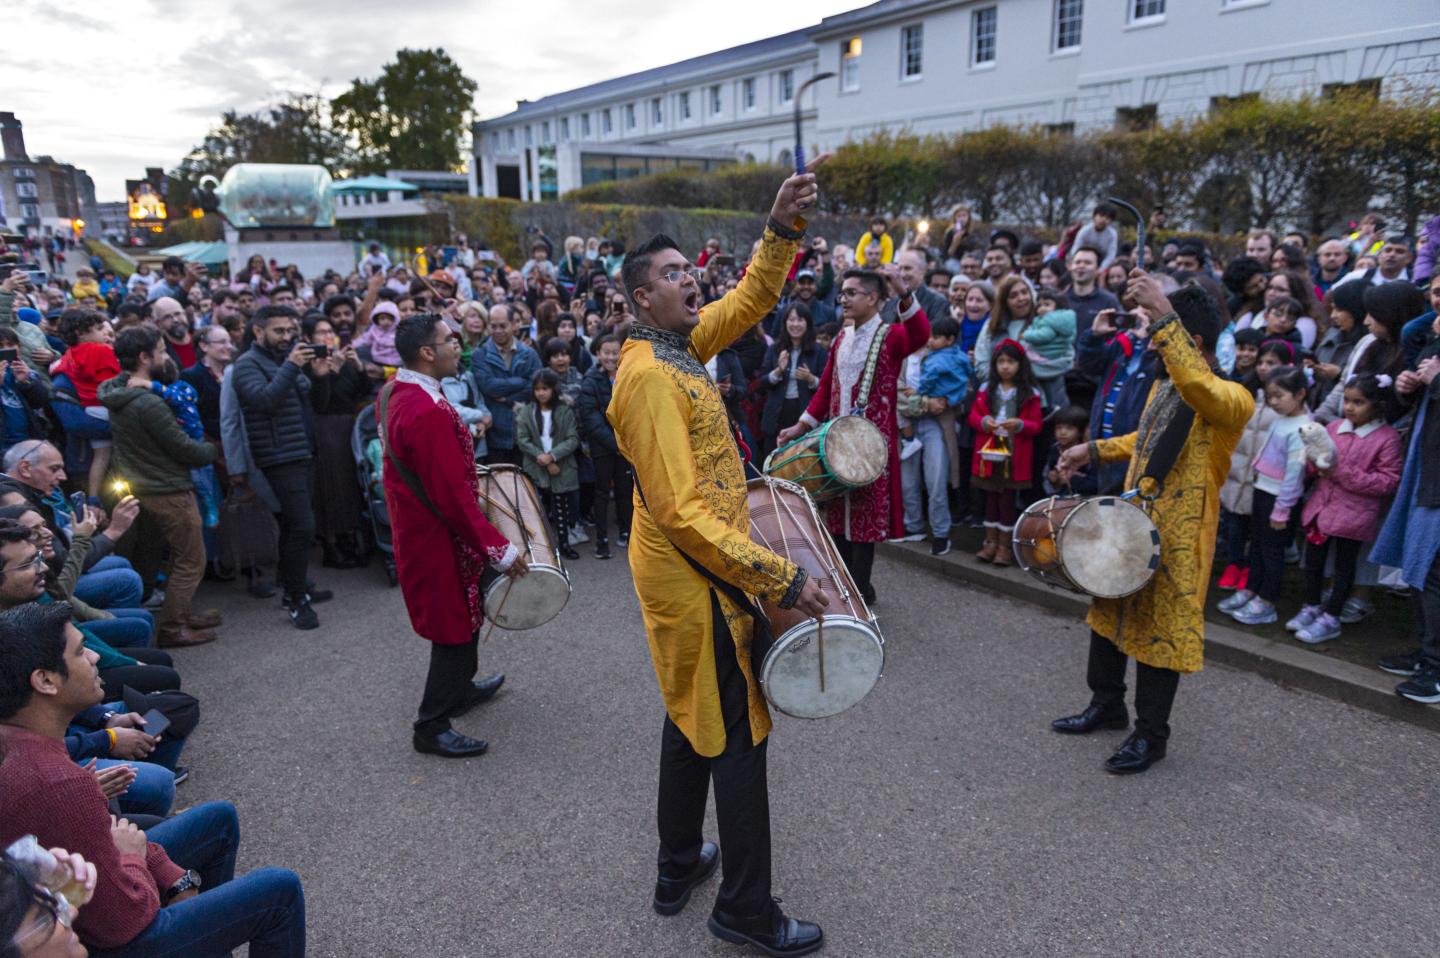 The image shows 4 men with drums surrounded by a crowd of onlookers.